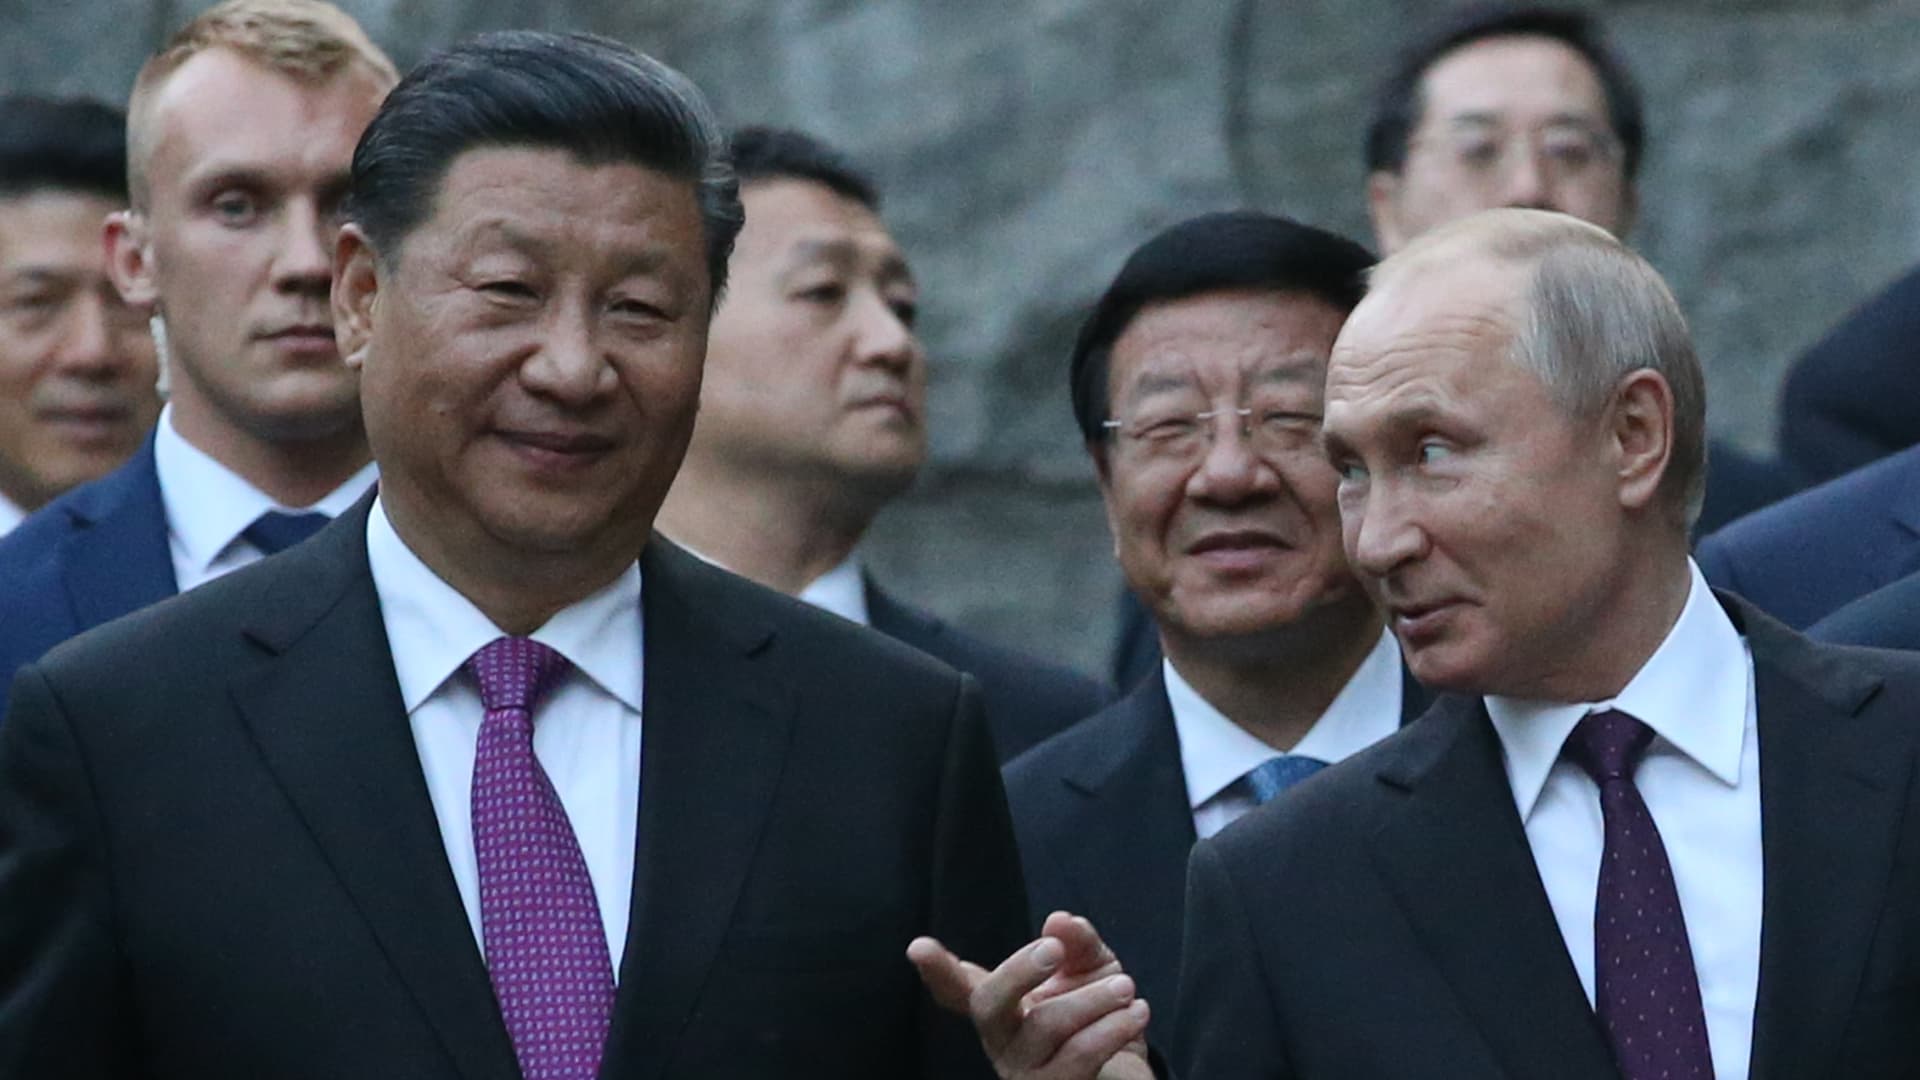 Russian President Vladimir Putin (R) talks to Chinese President Xi Jinping (C) while visiting the Moscow's Zoo in Moscow, Russia,, June,5, 2019. Chinese leader Xi Jinping is having a three-days state visit to Russia.